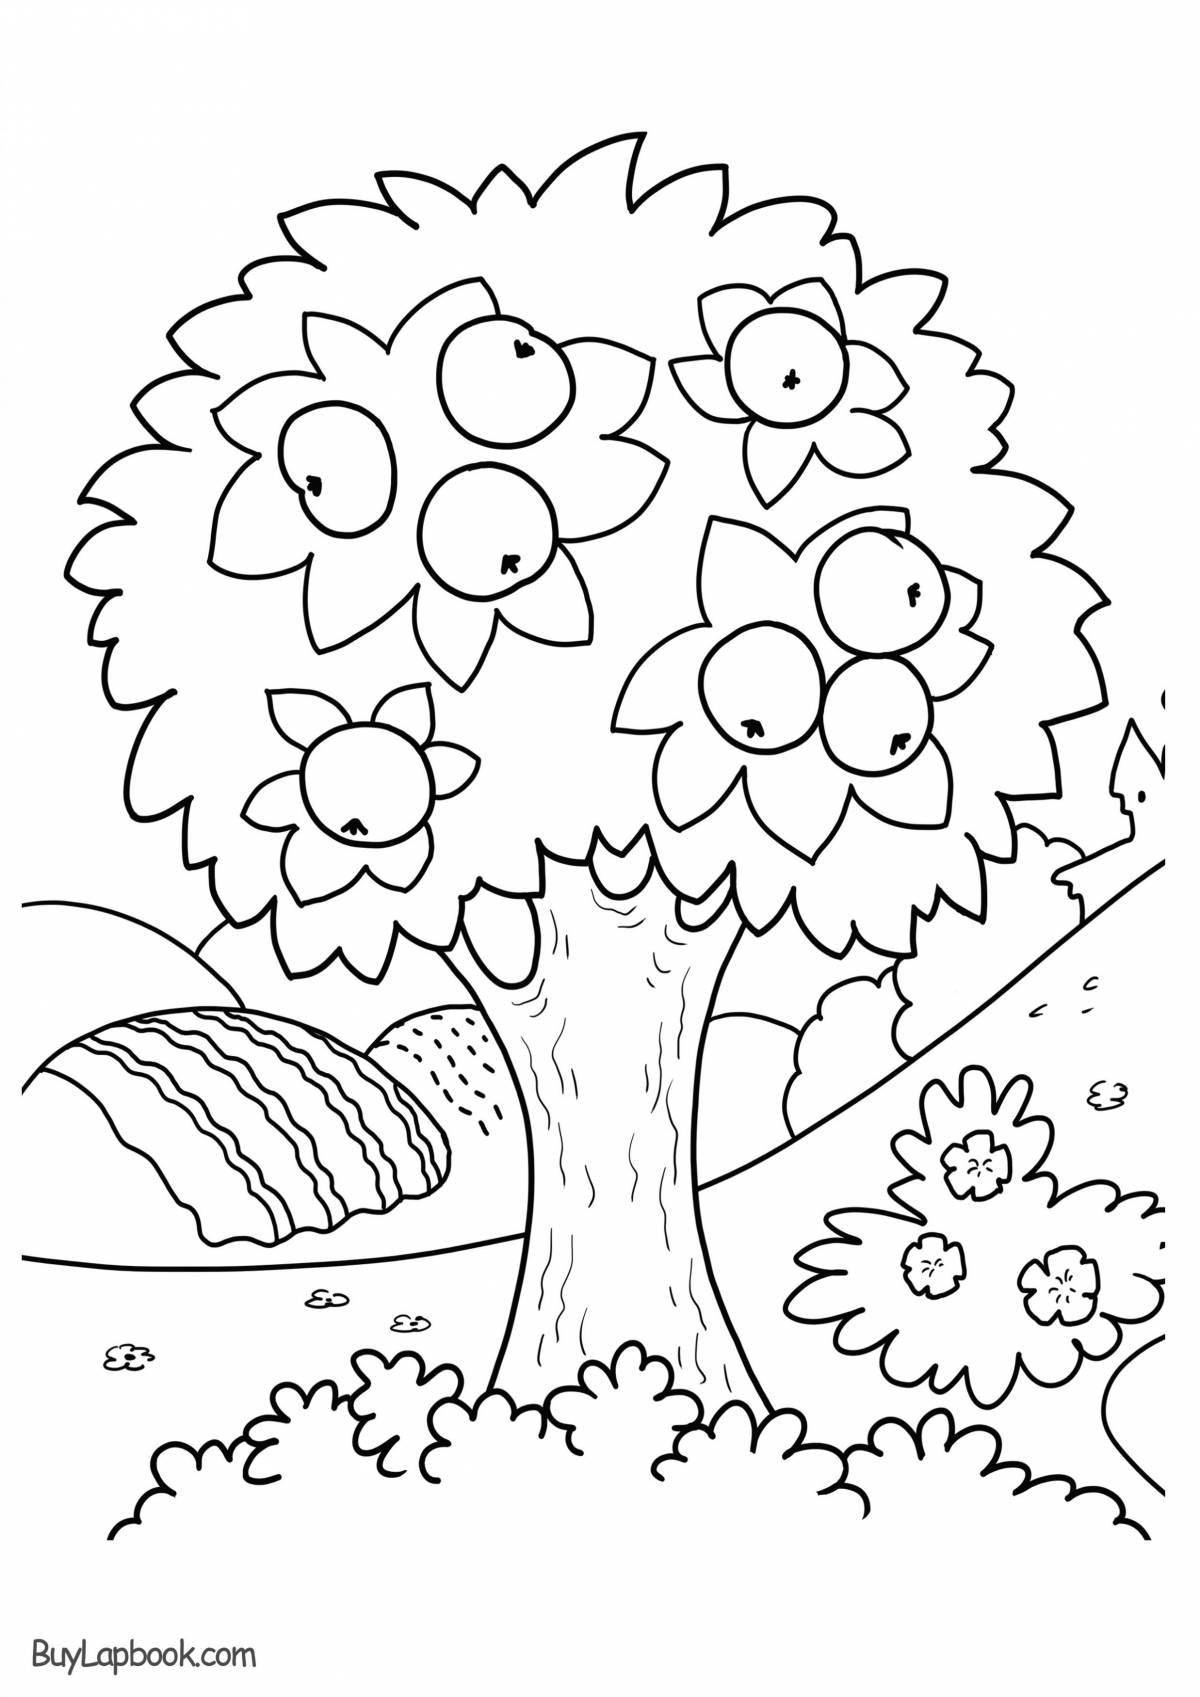 Coloring book inviting Christmas tree for children 4-5 years old